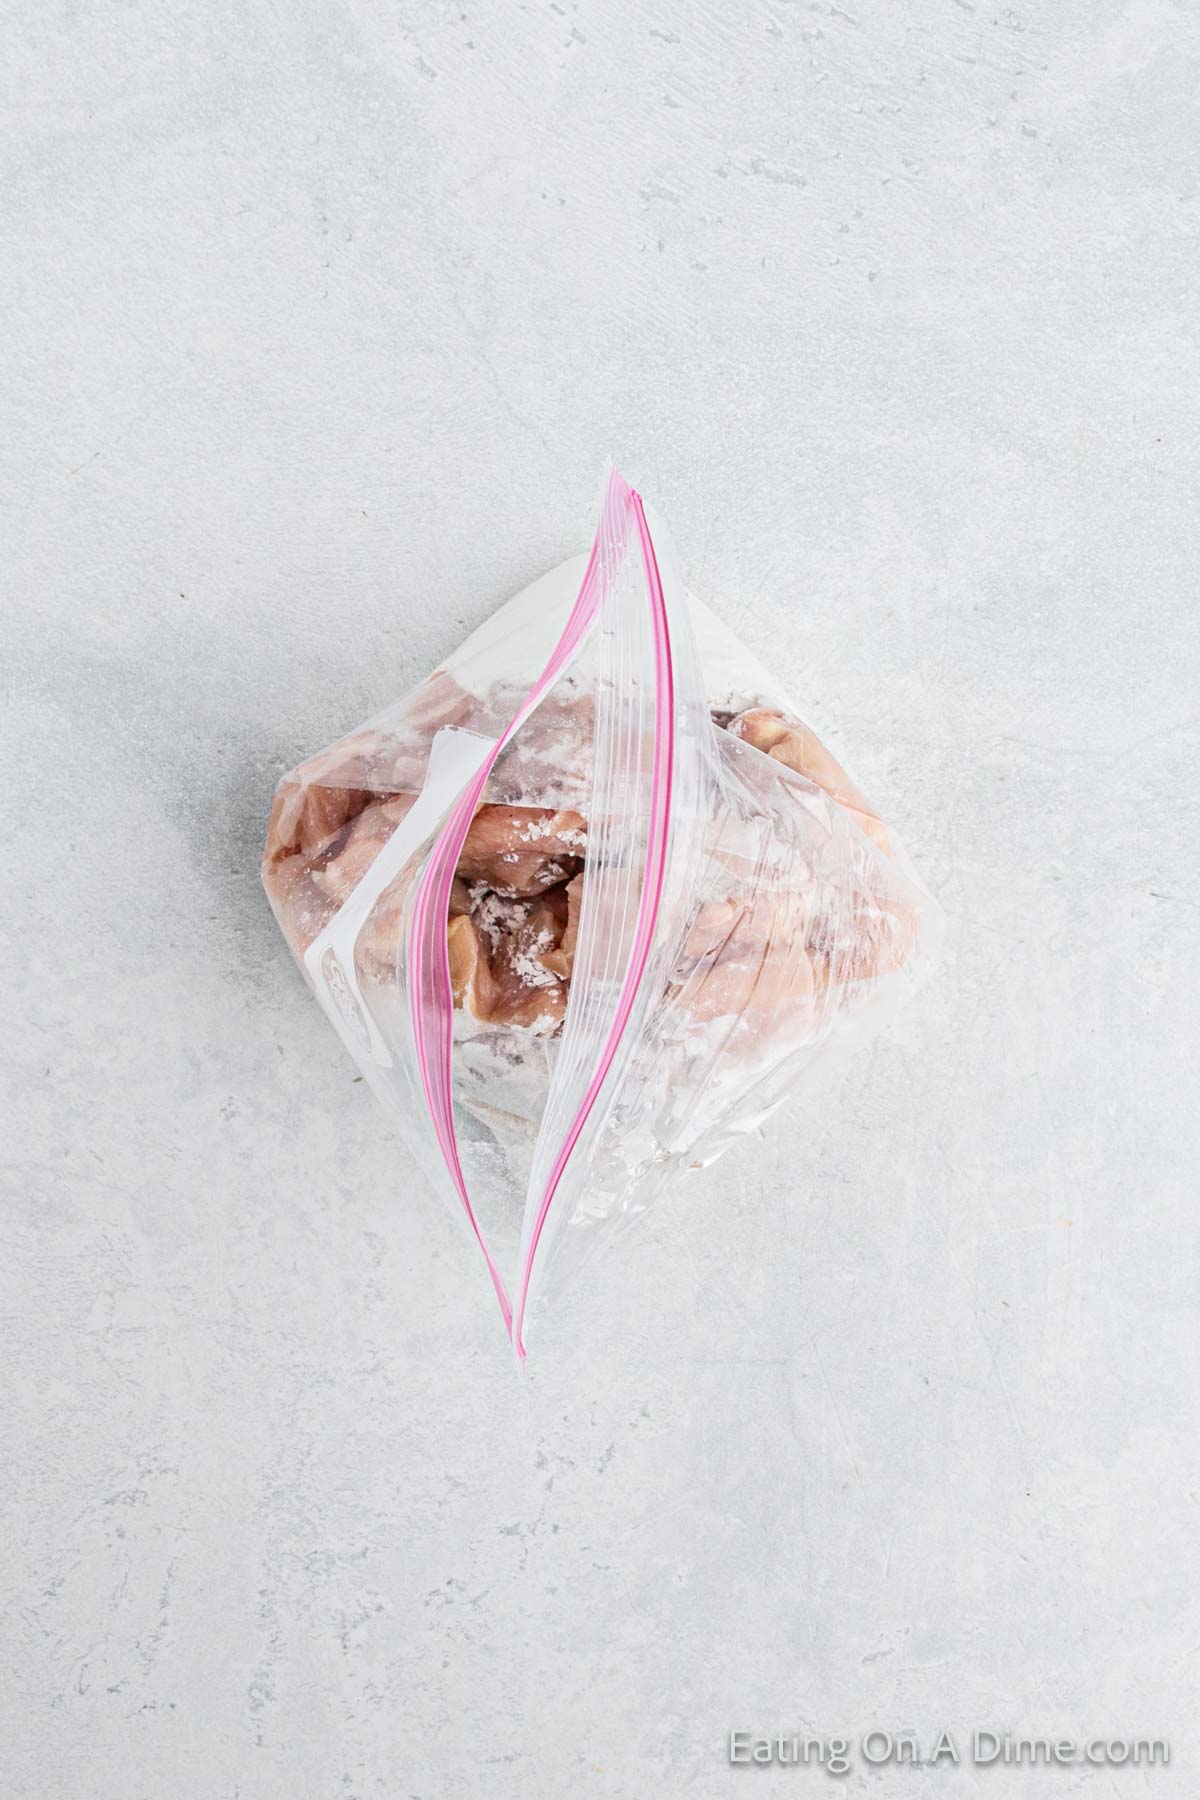 Diced chicken placed in a ziplock bag and added flour to coat chicken